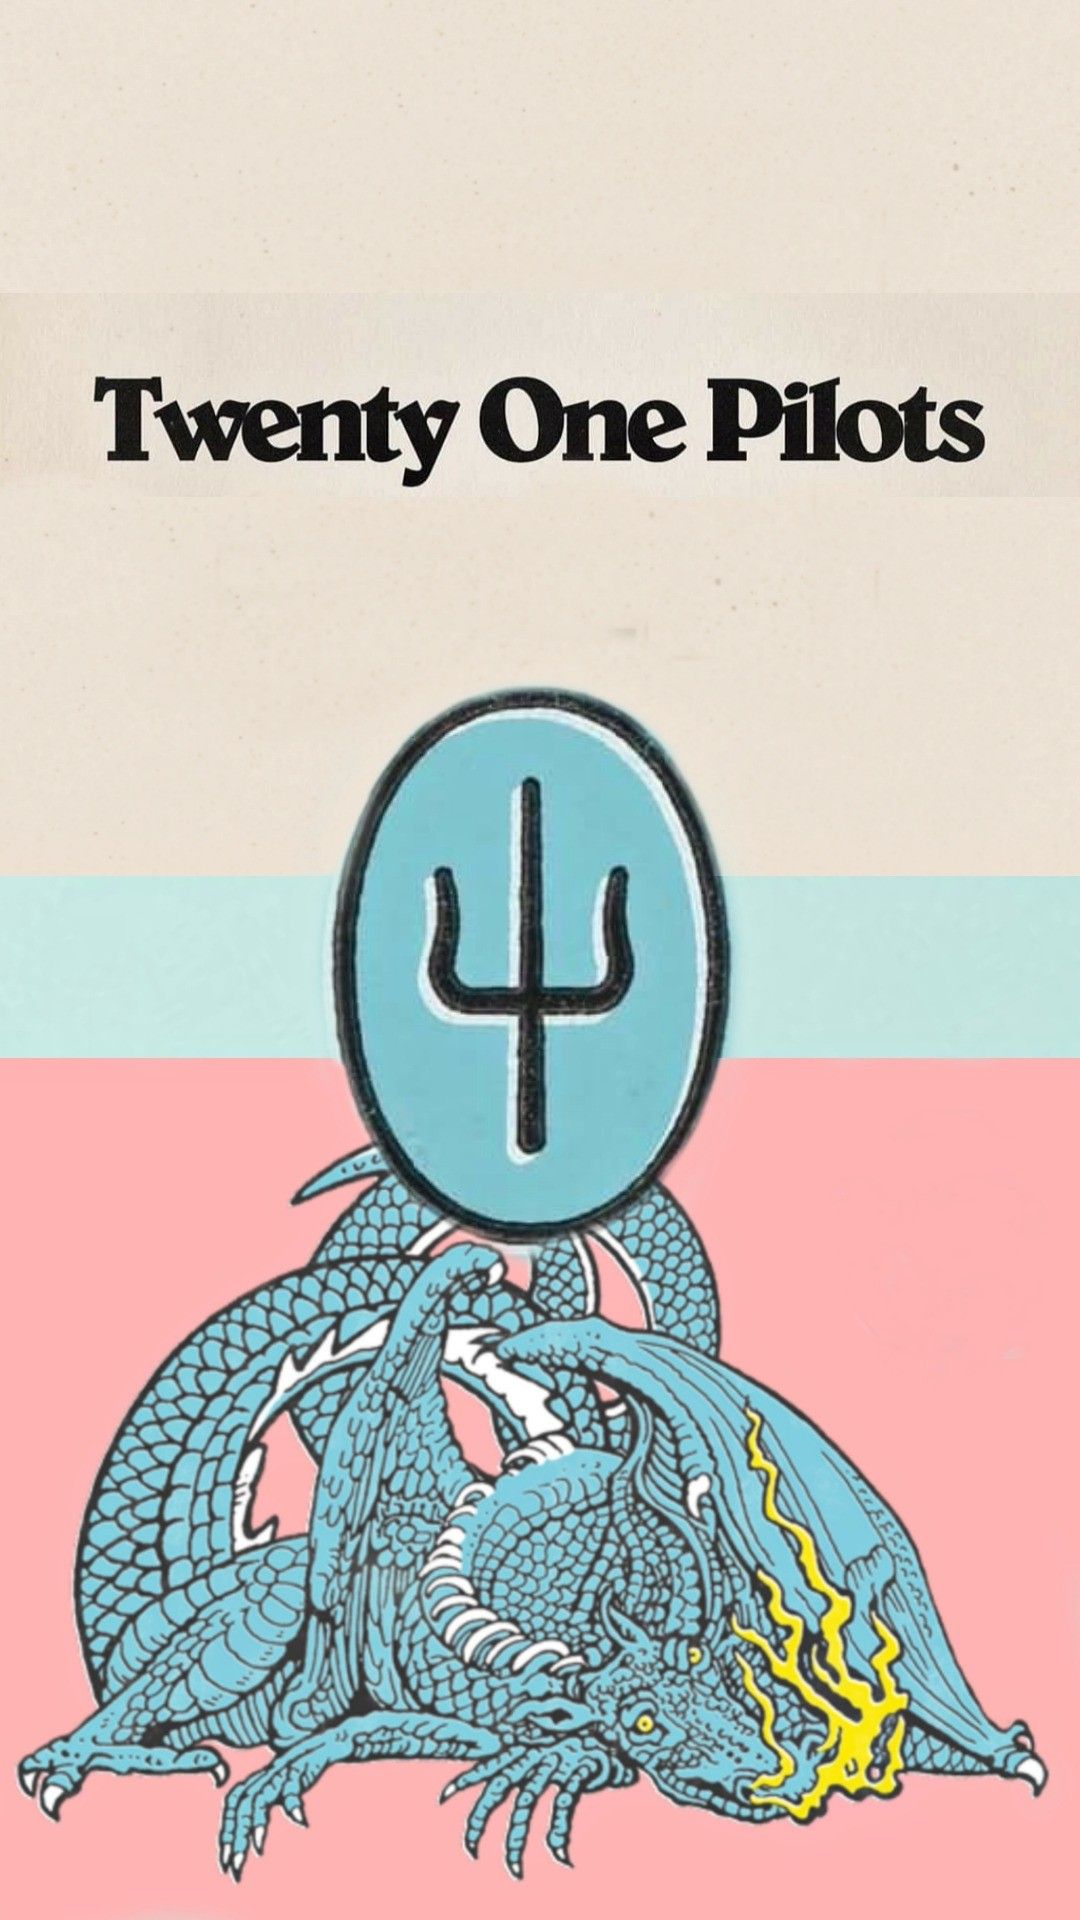 Twenty one pilots ideas. twenty one pilots, twenty one, one pilots